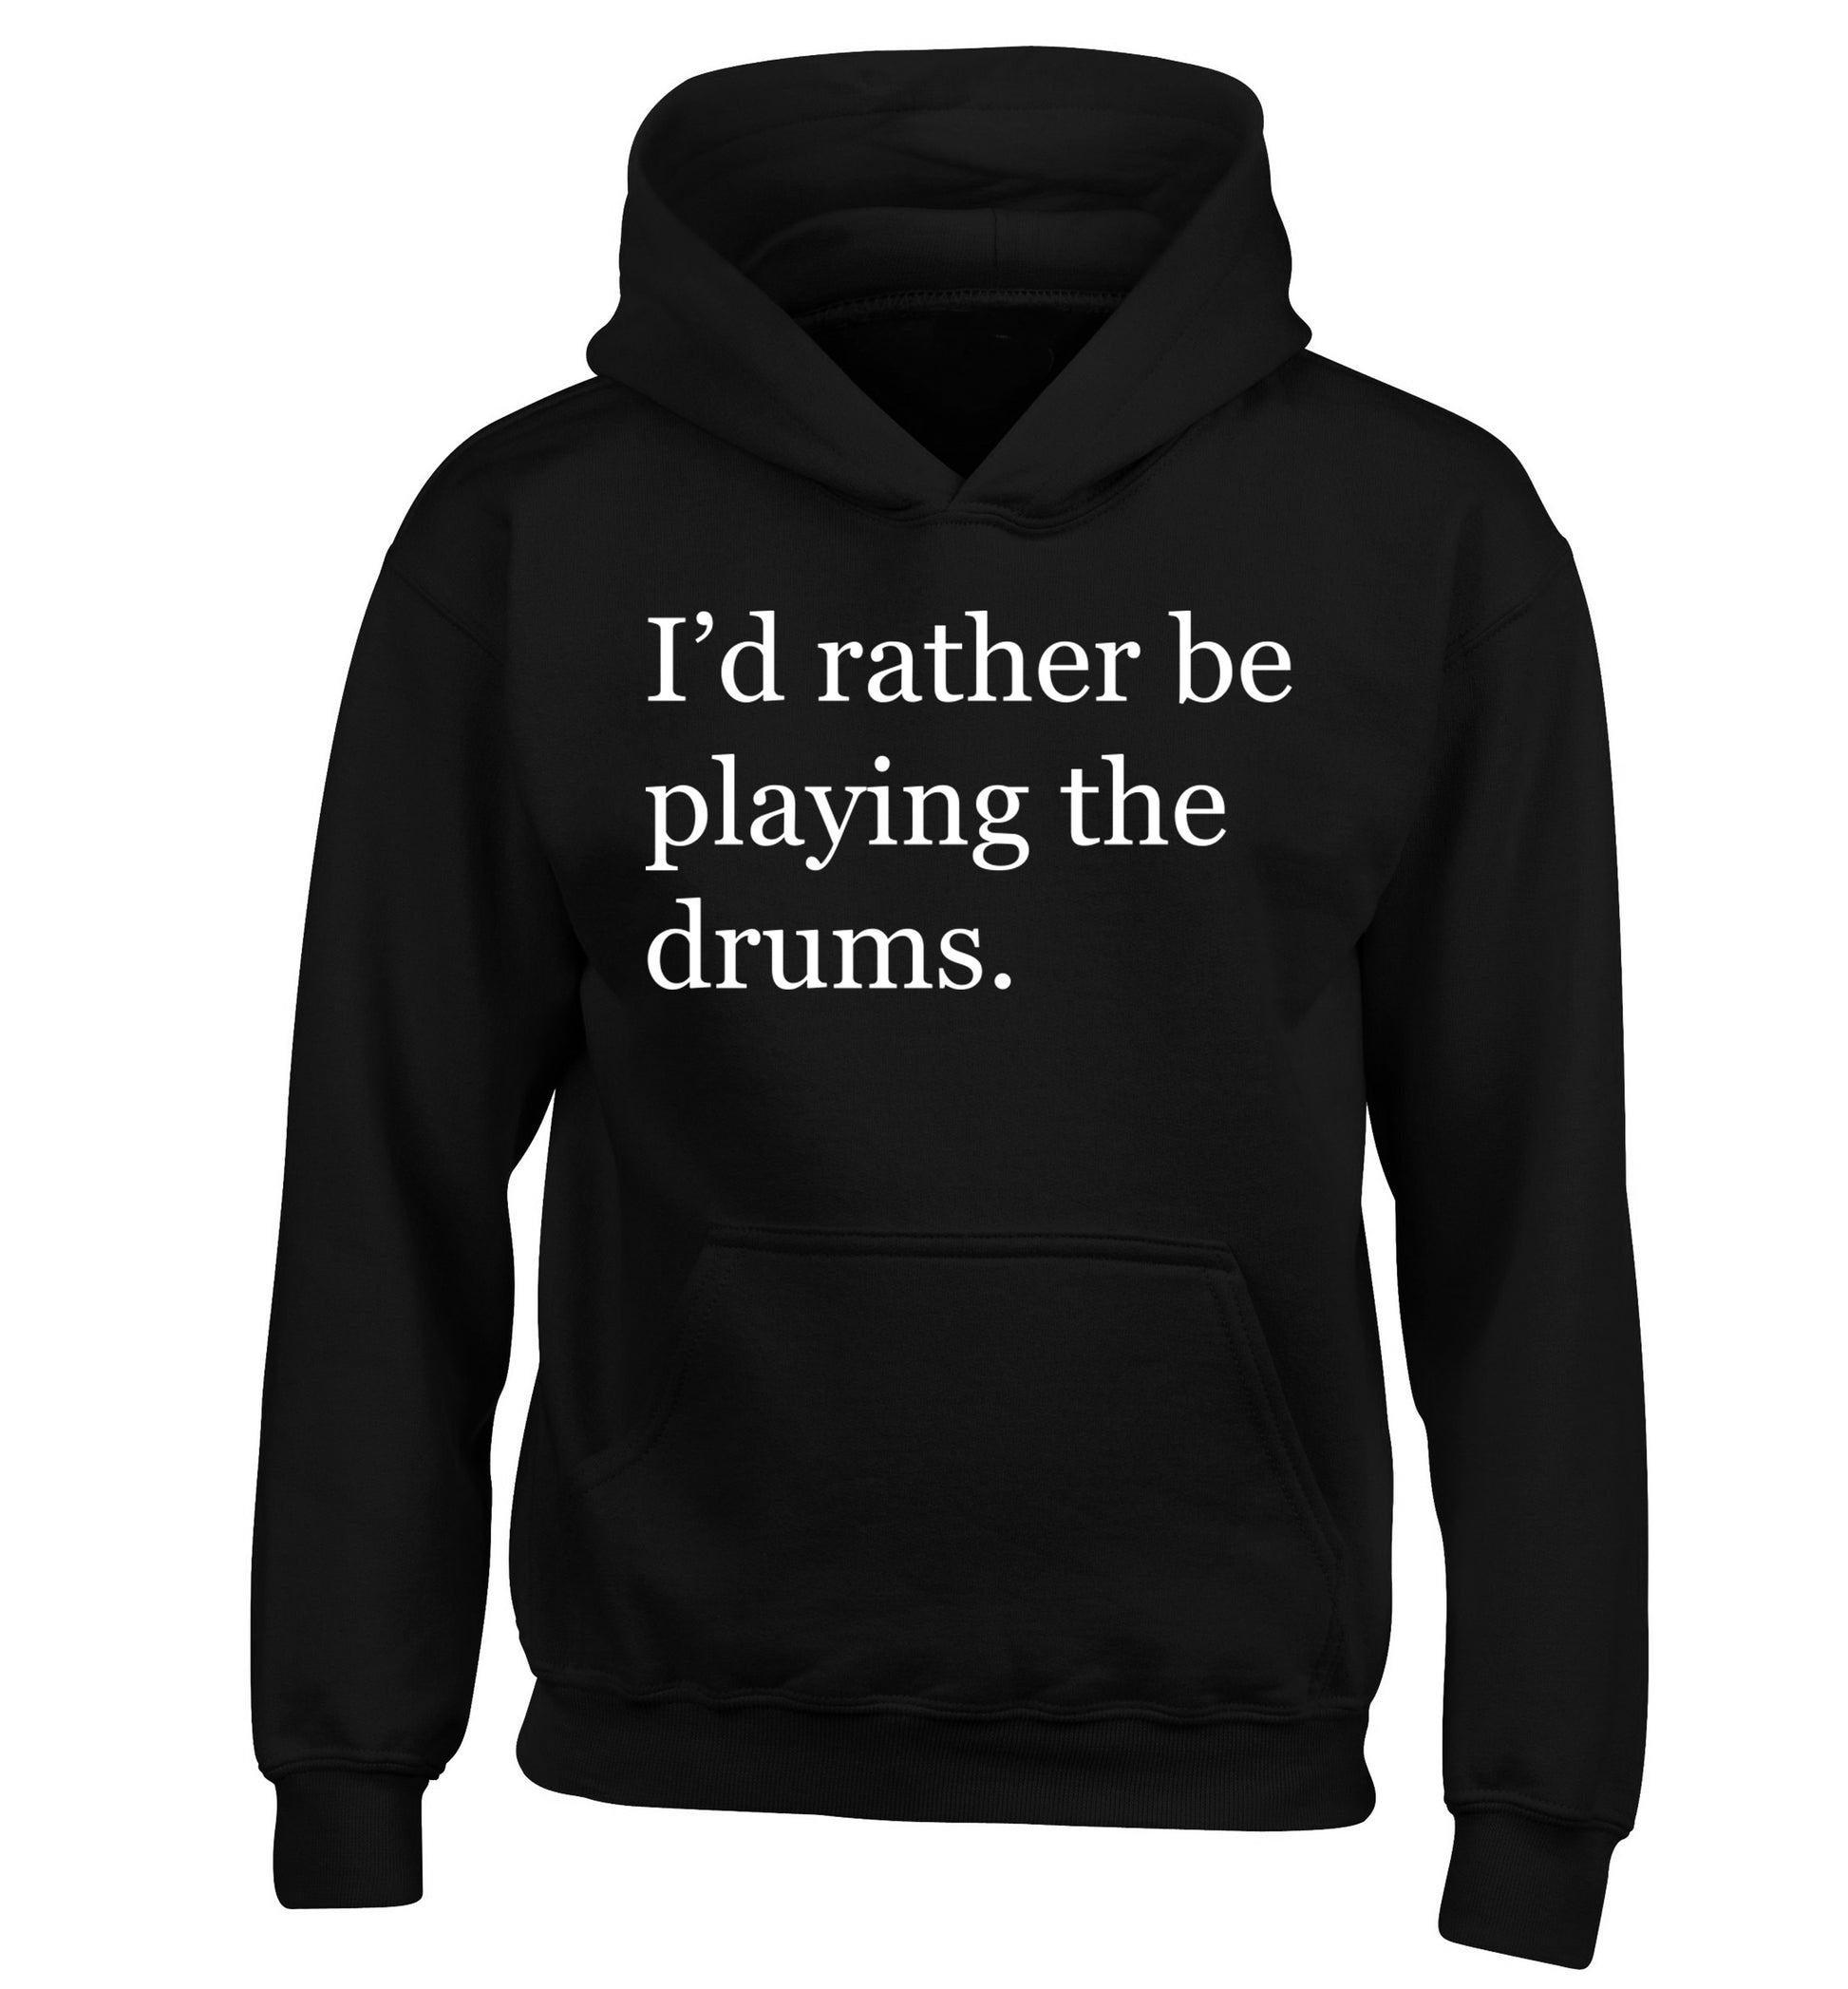 I'd rather be playing the drums children's black hoodie 12-14 Years